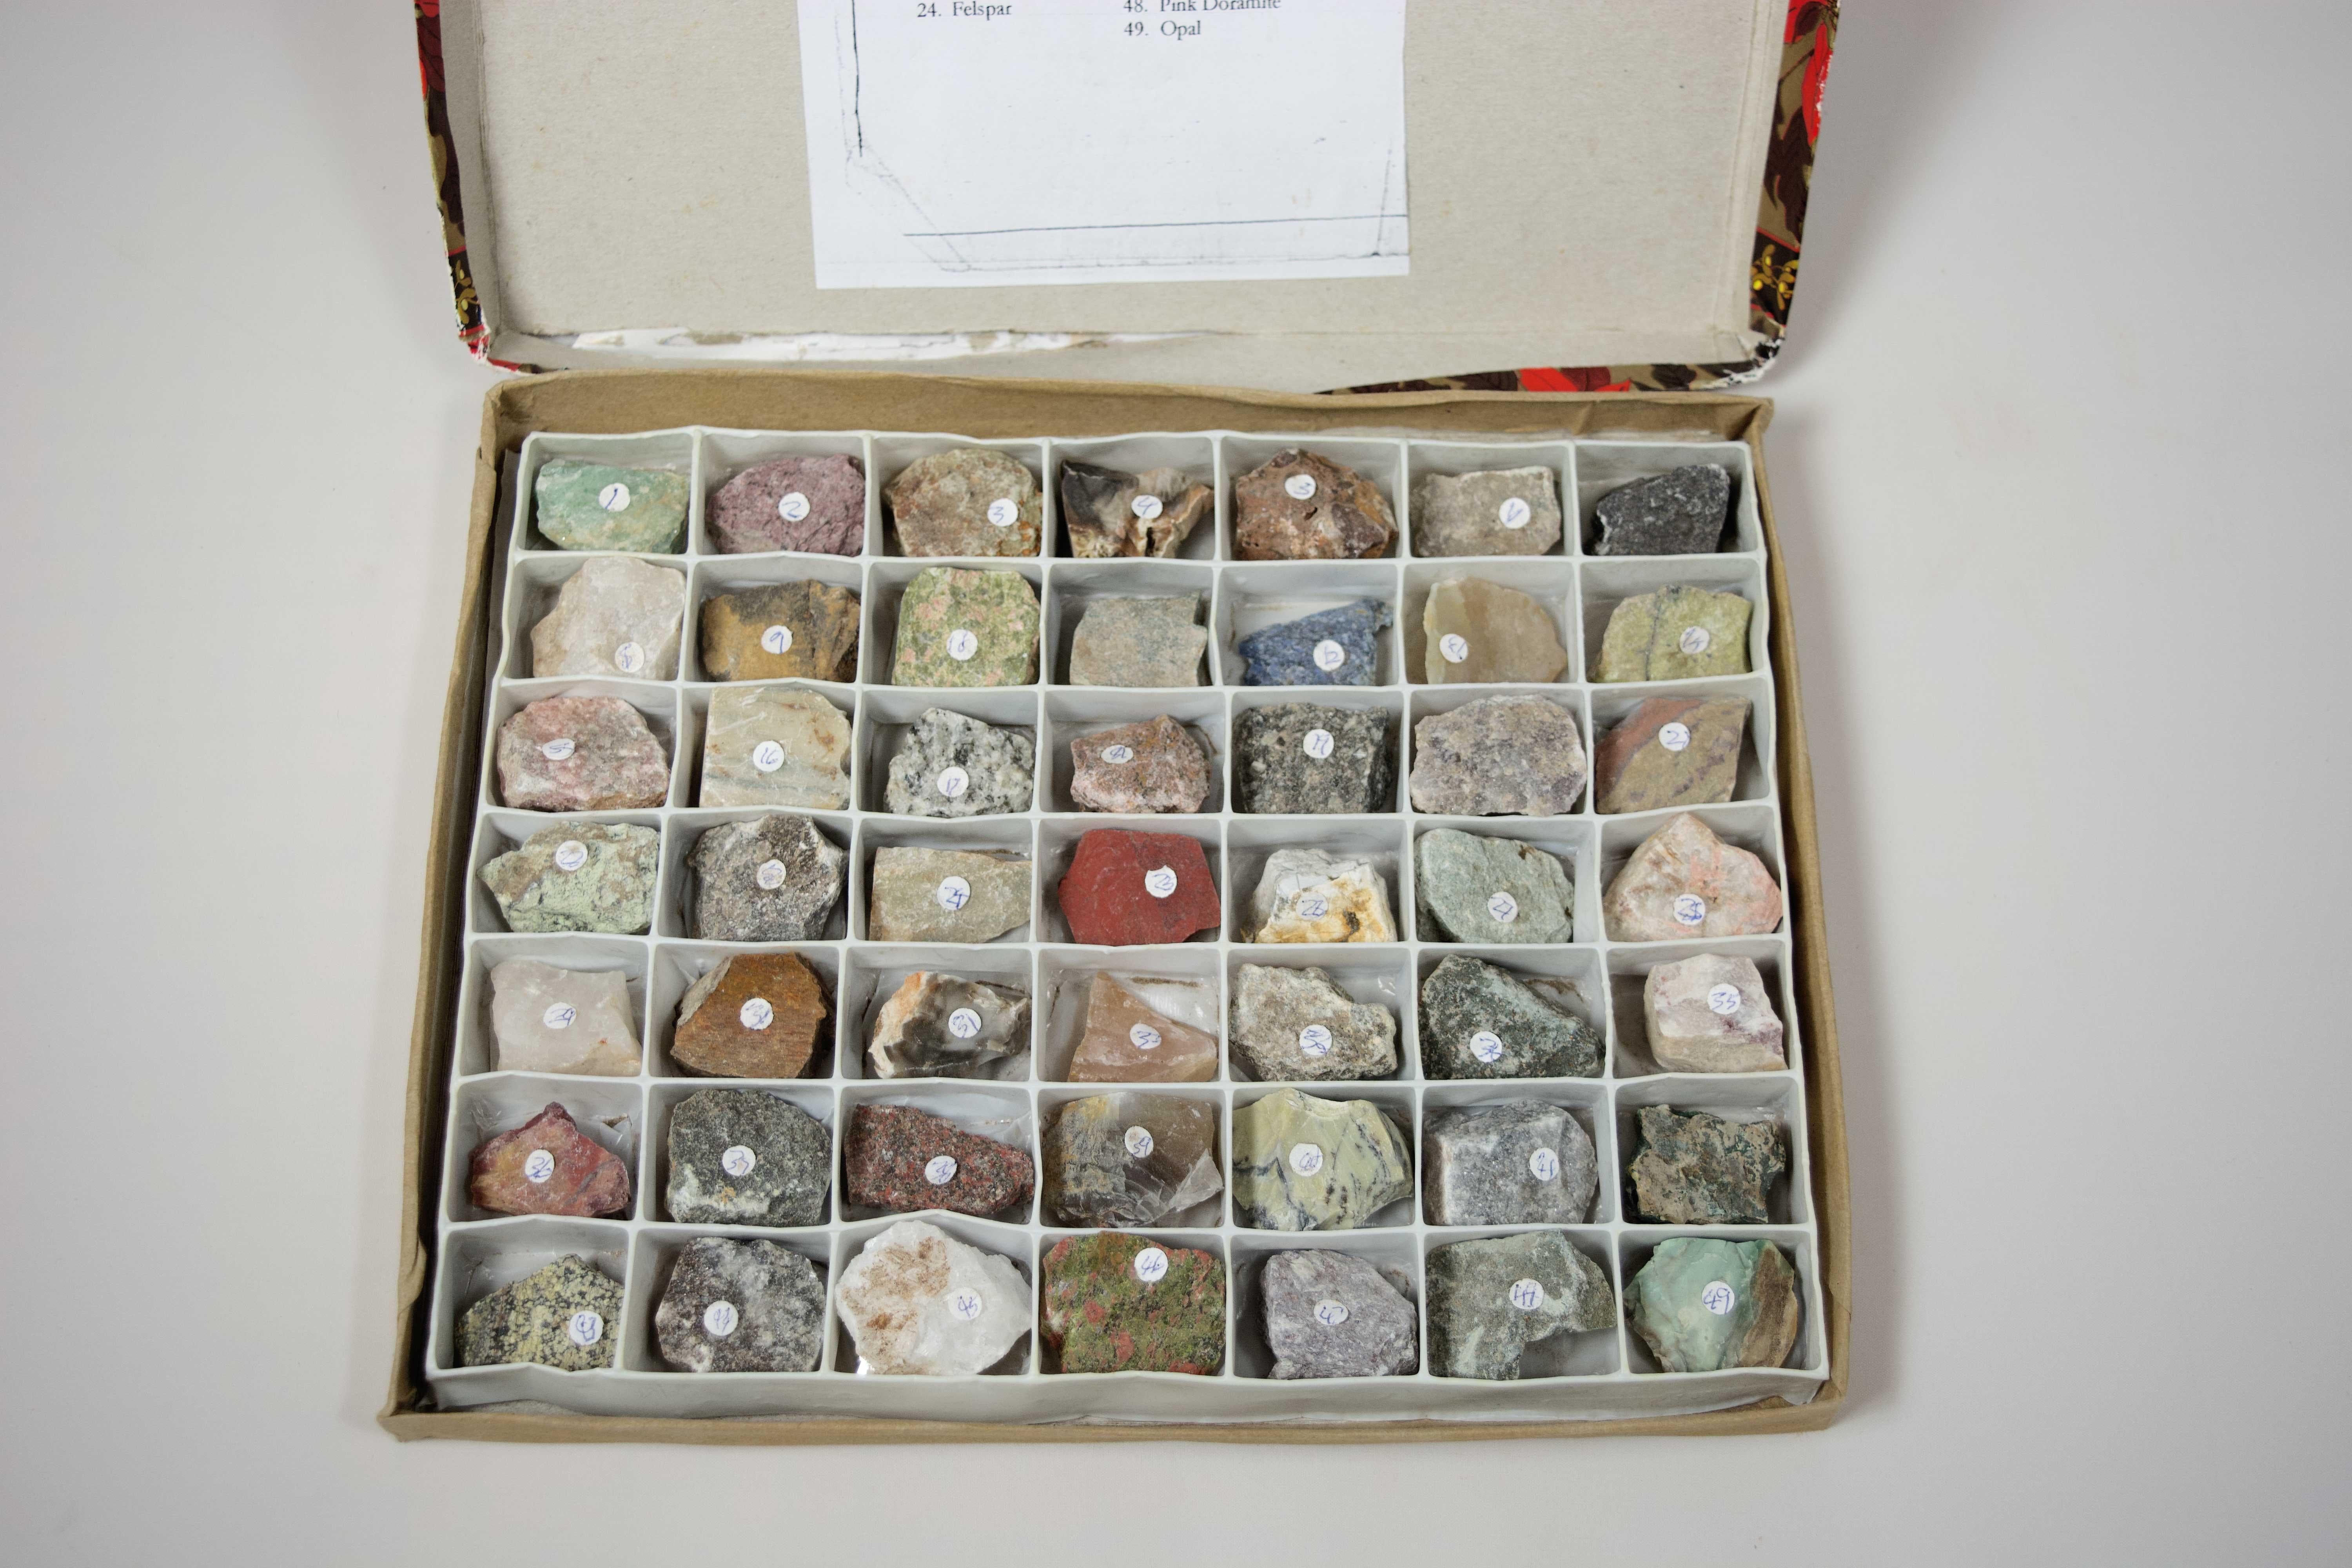 49 Shona Stone Samples with Specimen Box - Mixed Media Art by Unknown